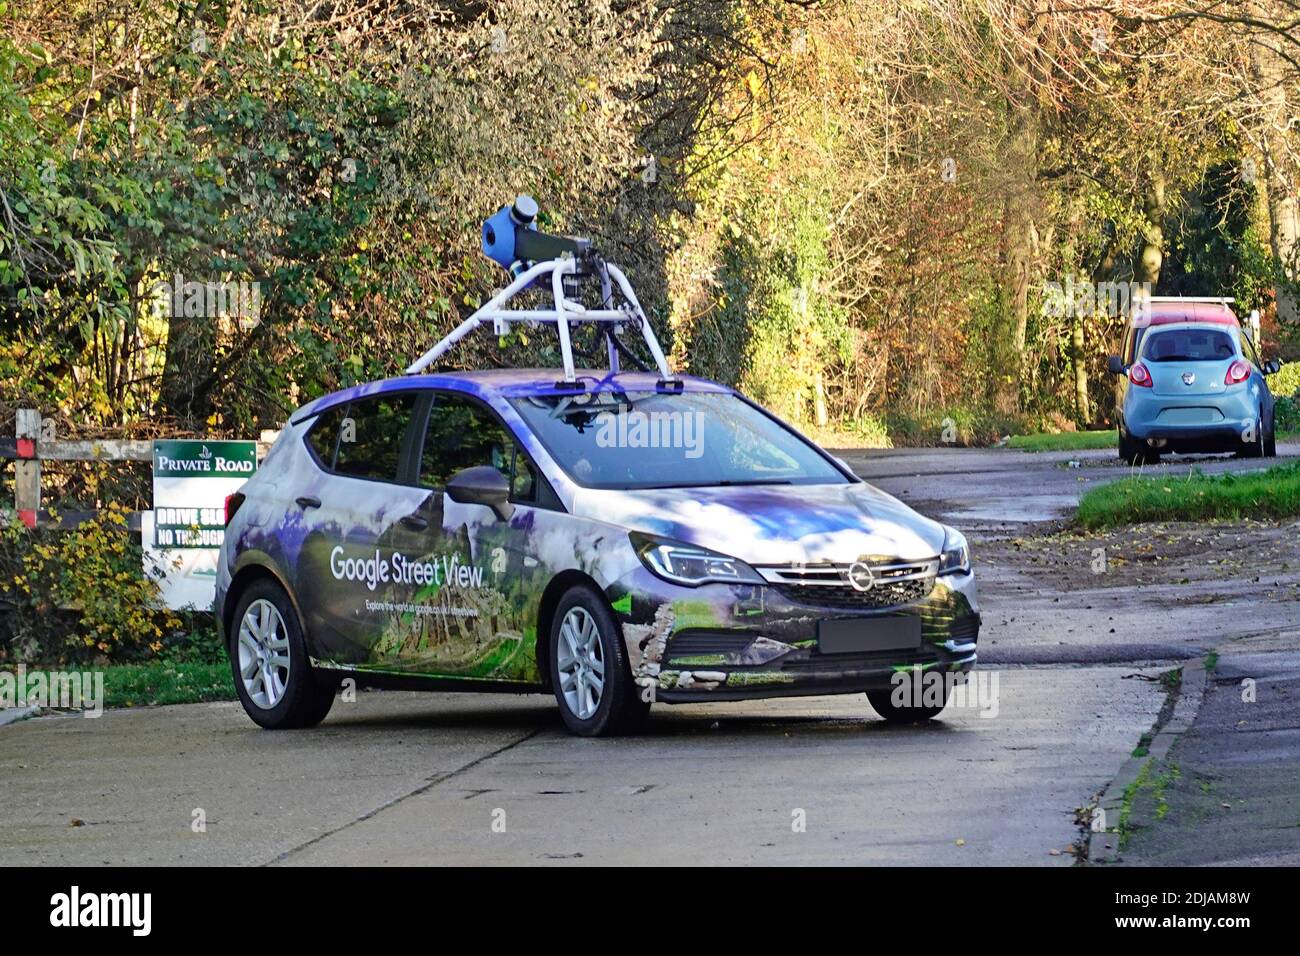 Close up of Google car & video camera rig fixed into vehicle roof filming street view pegman map images driving residential road Essex England UK Stock Photo